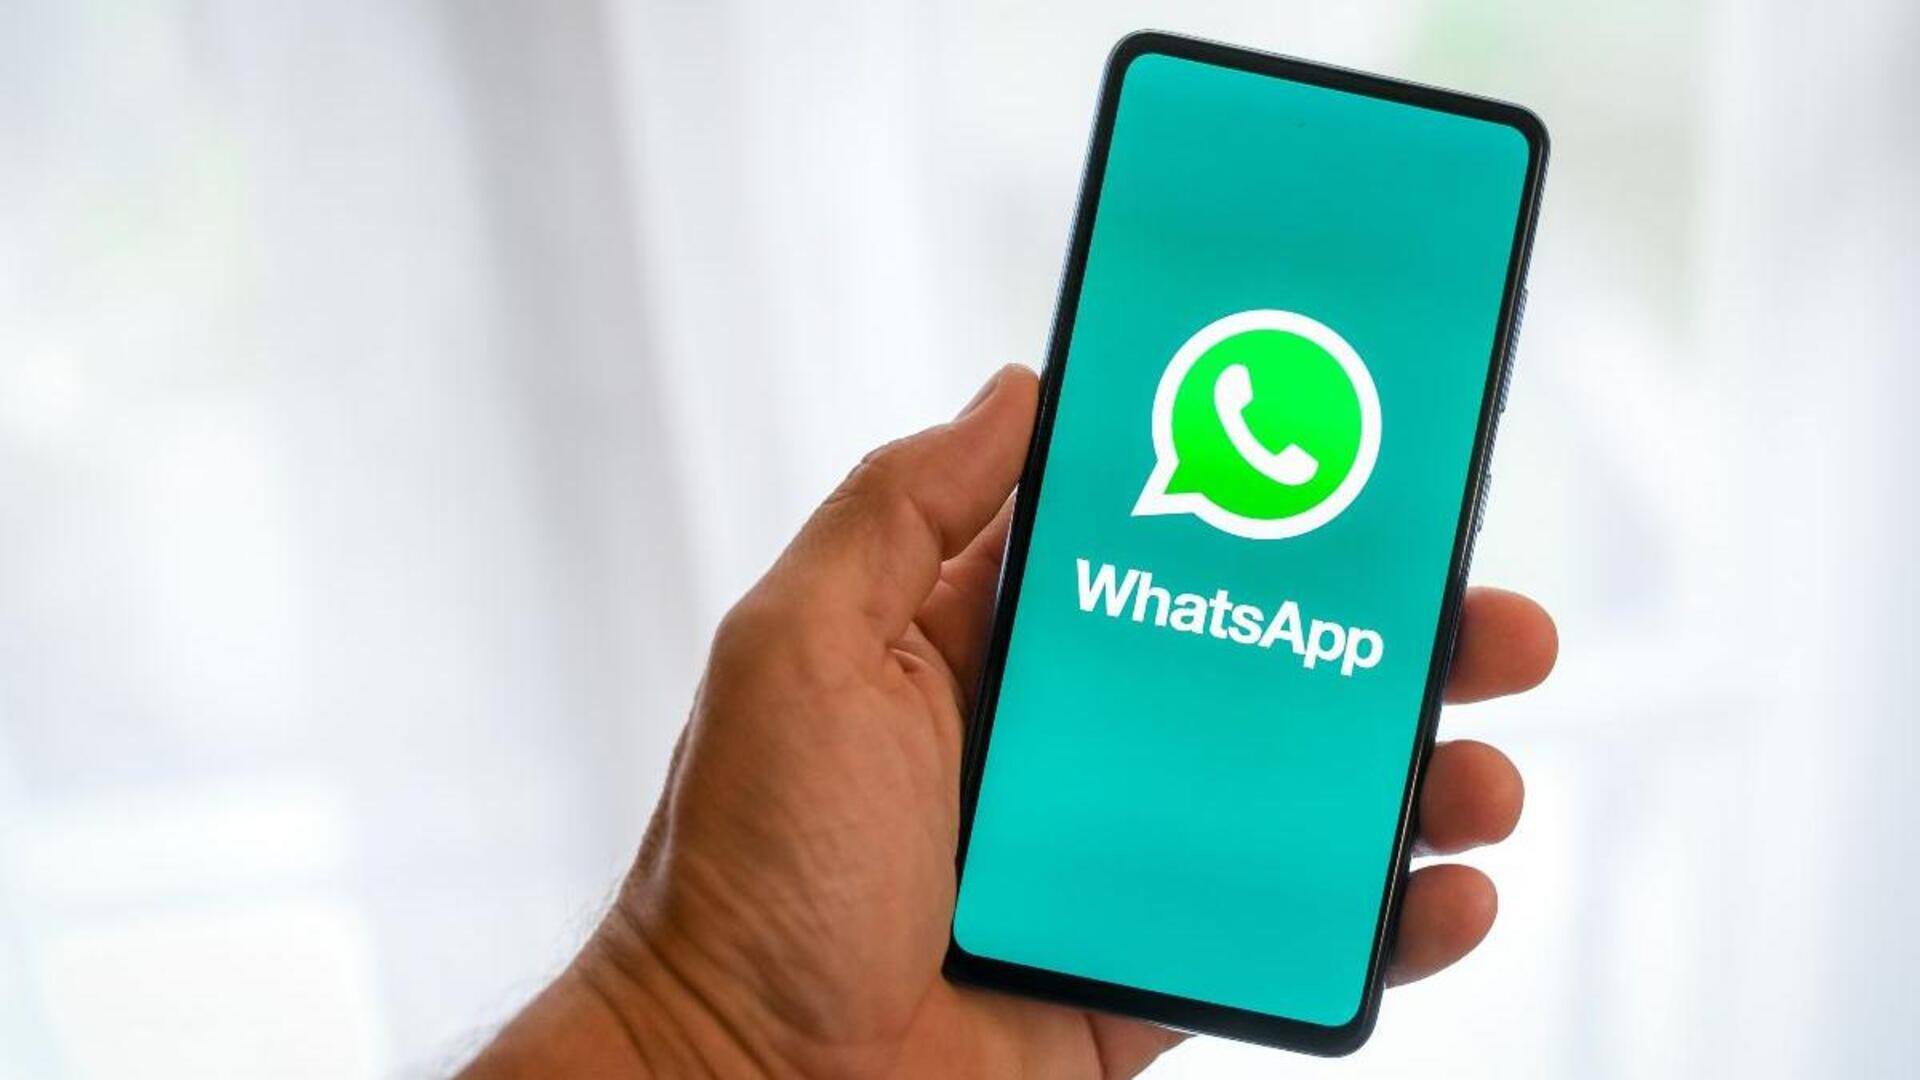 WhatsApp rolling out new feature to access channel reports